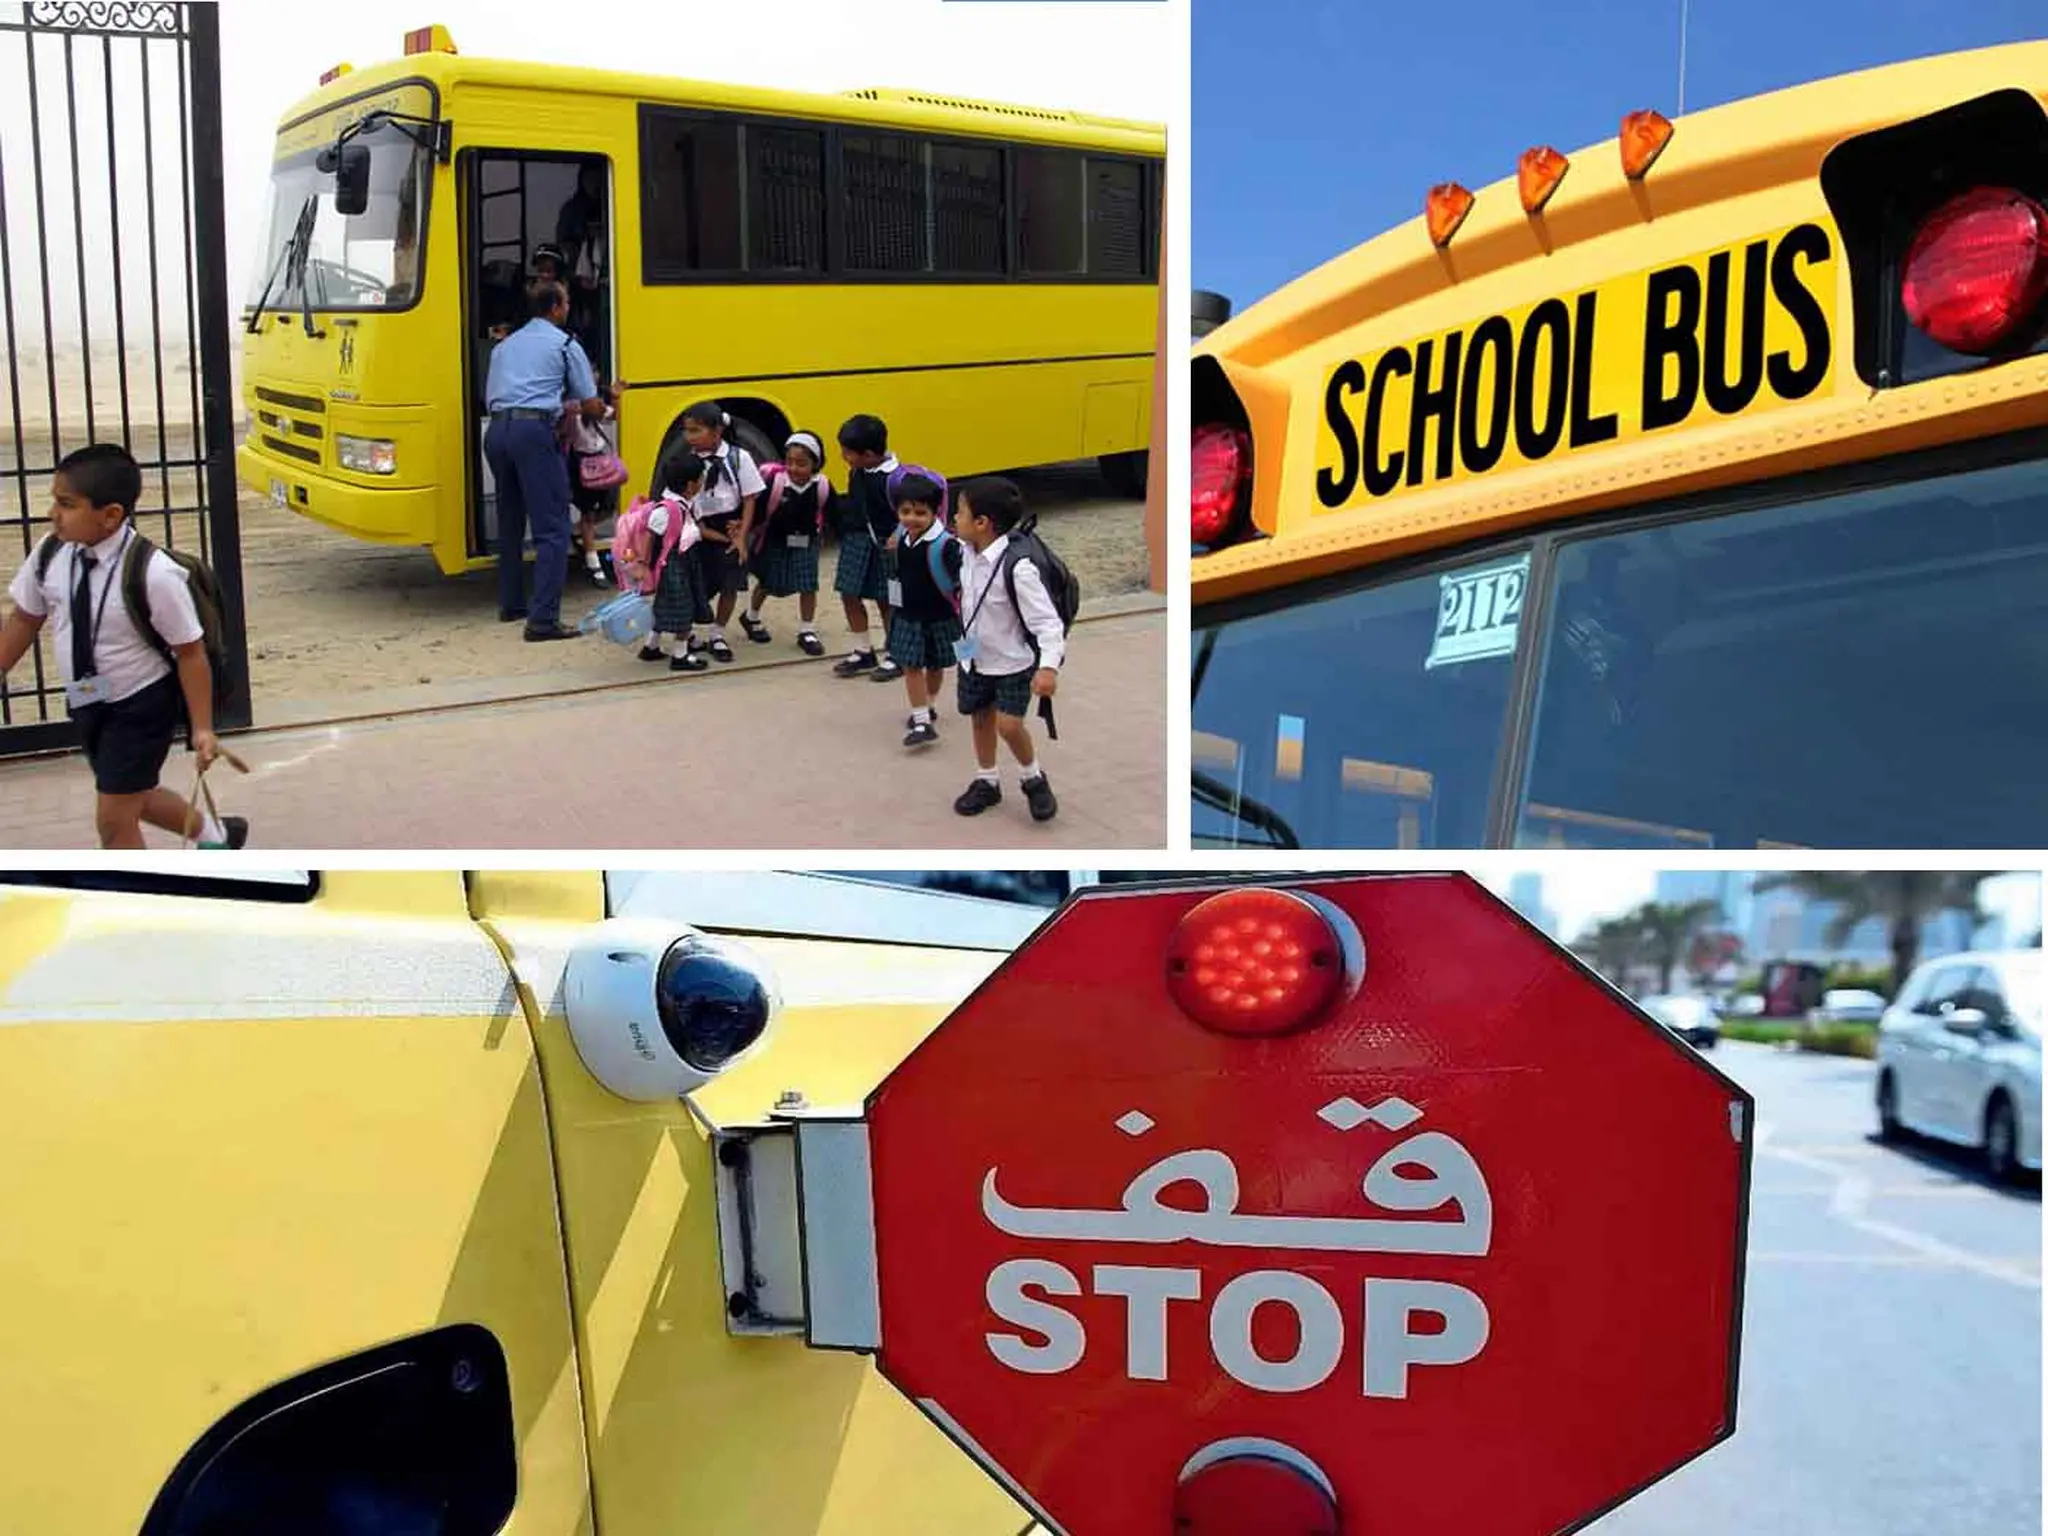 The emirates requires school bus drivers to follow the following rules for student safety